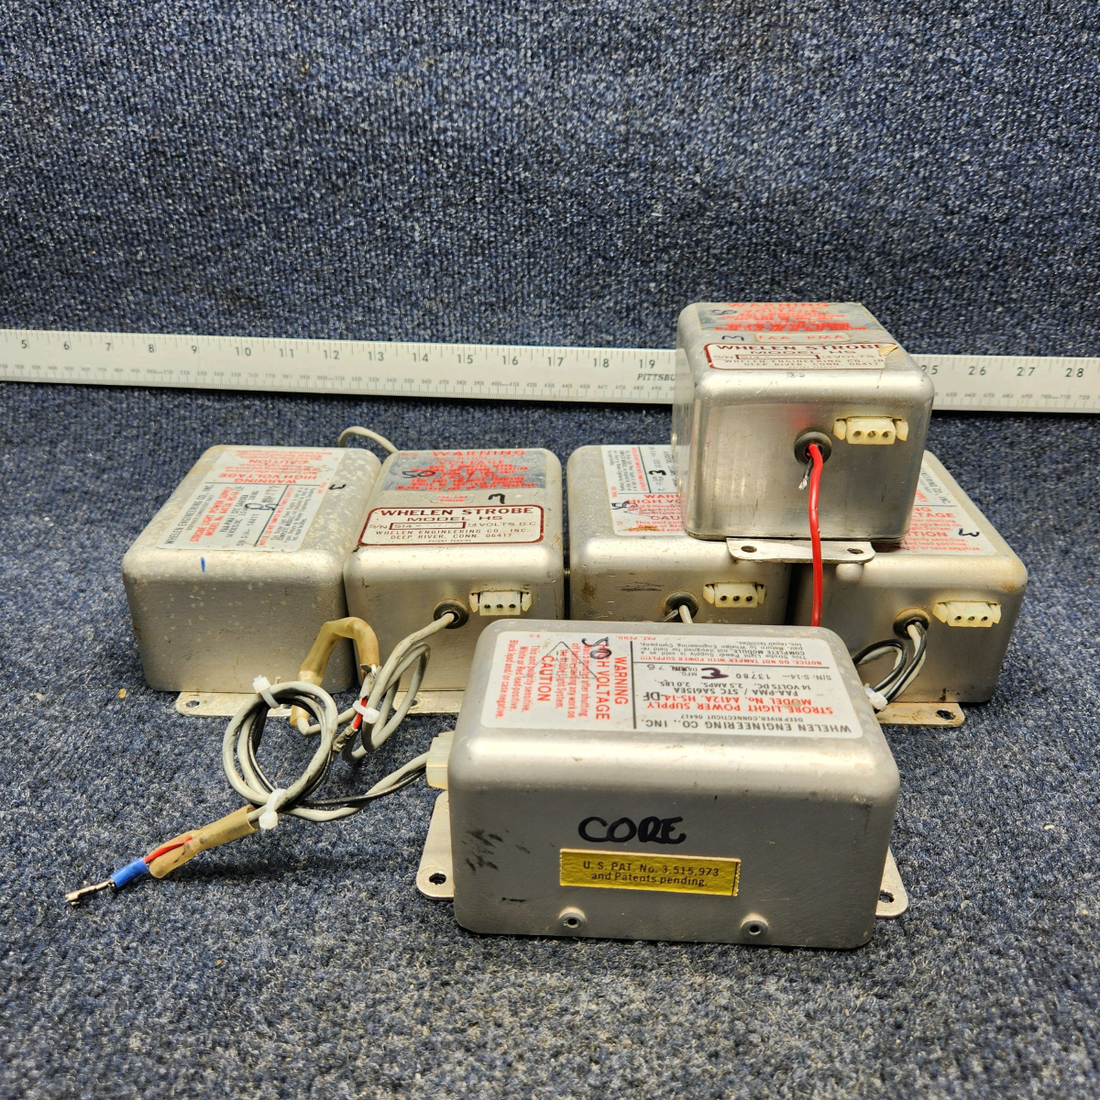 Used aircraft parts for sale, A412A. HS-14 Whelen Strobe Power Supply WHELEN STROBE LIGHT POWER SUPPLY "FOR PARTS ONLY" 14VOLTS